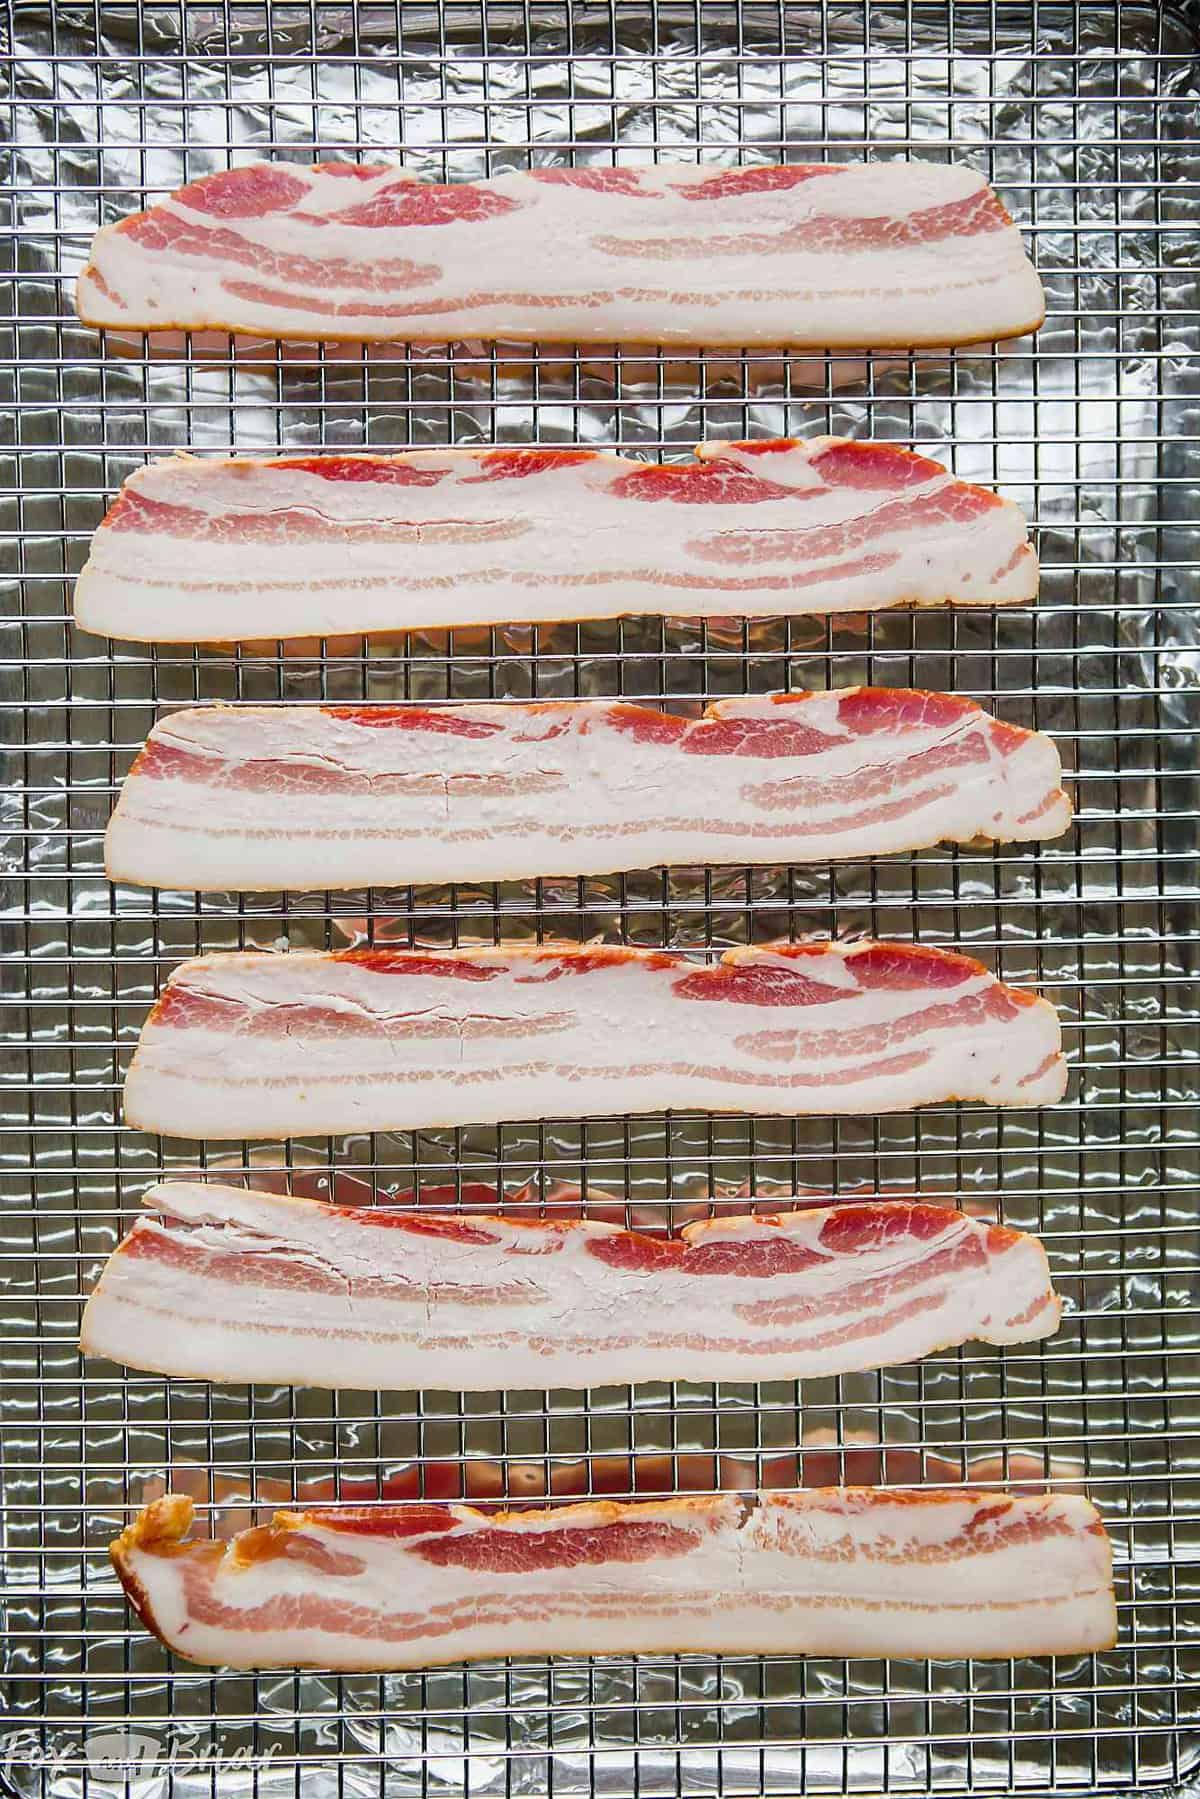 How to make the best bacon | How to bake bacon in the oven | This cut bacon | brown sugar bacon | Maple Bacon | How to make perfect bacon | Bacon for a crowd | easy bacon | Candied Bacon | Bacon recipe | No Mess Bacon | how to bake bacon at 350 